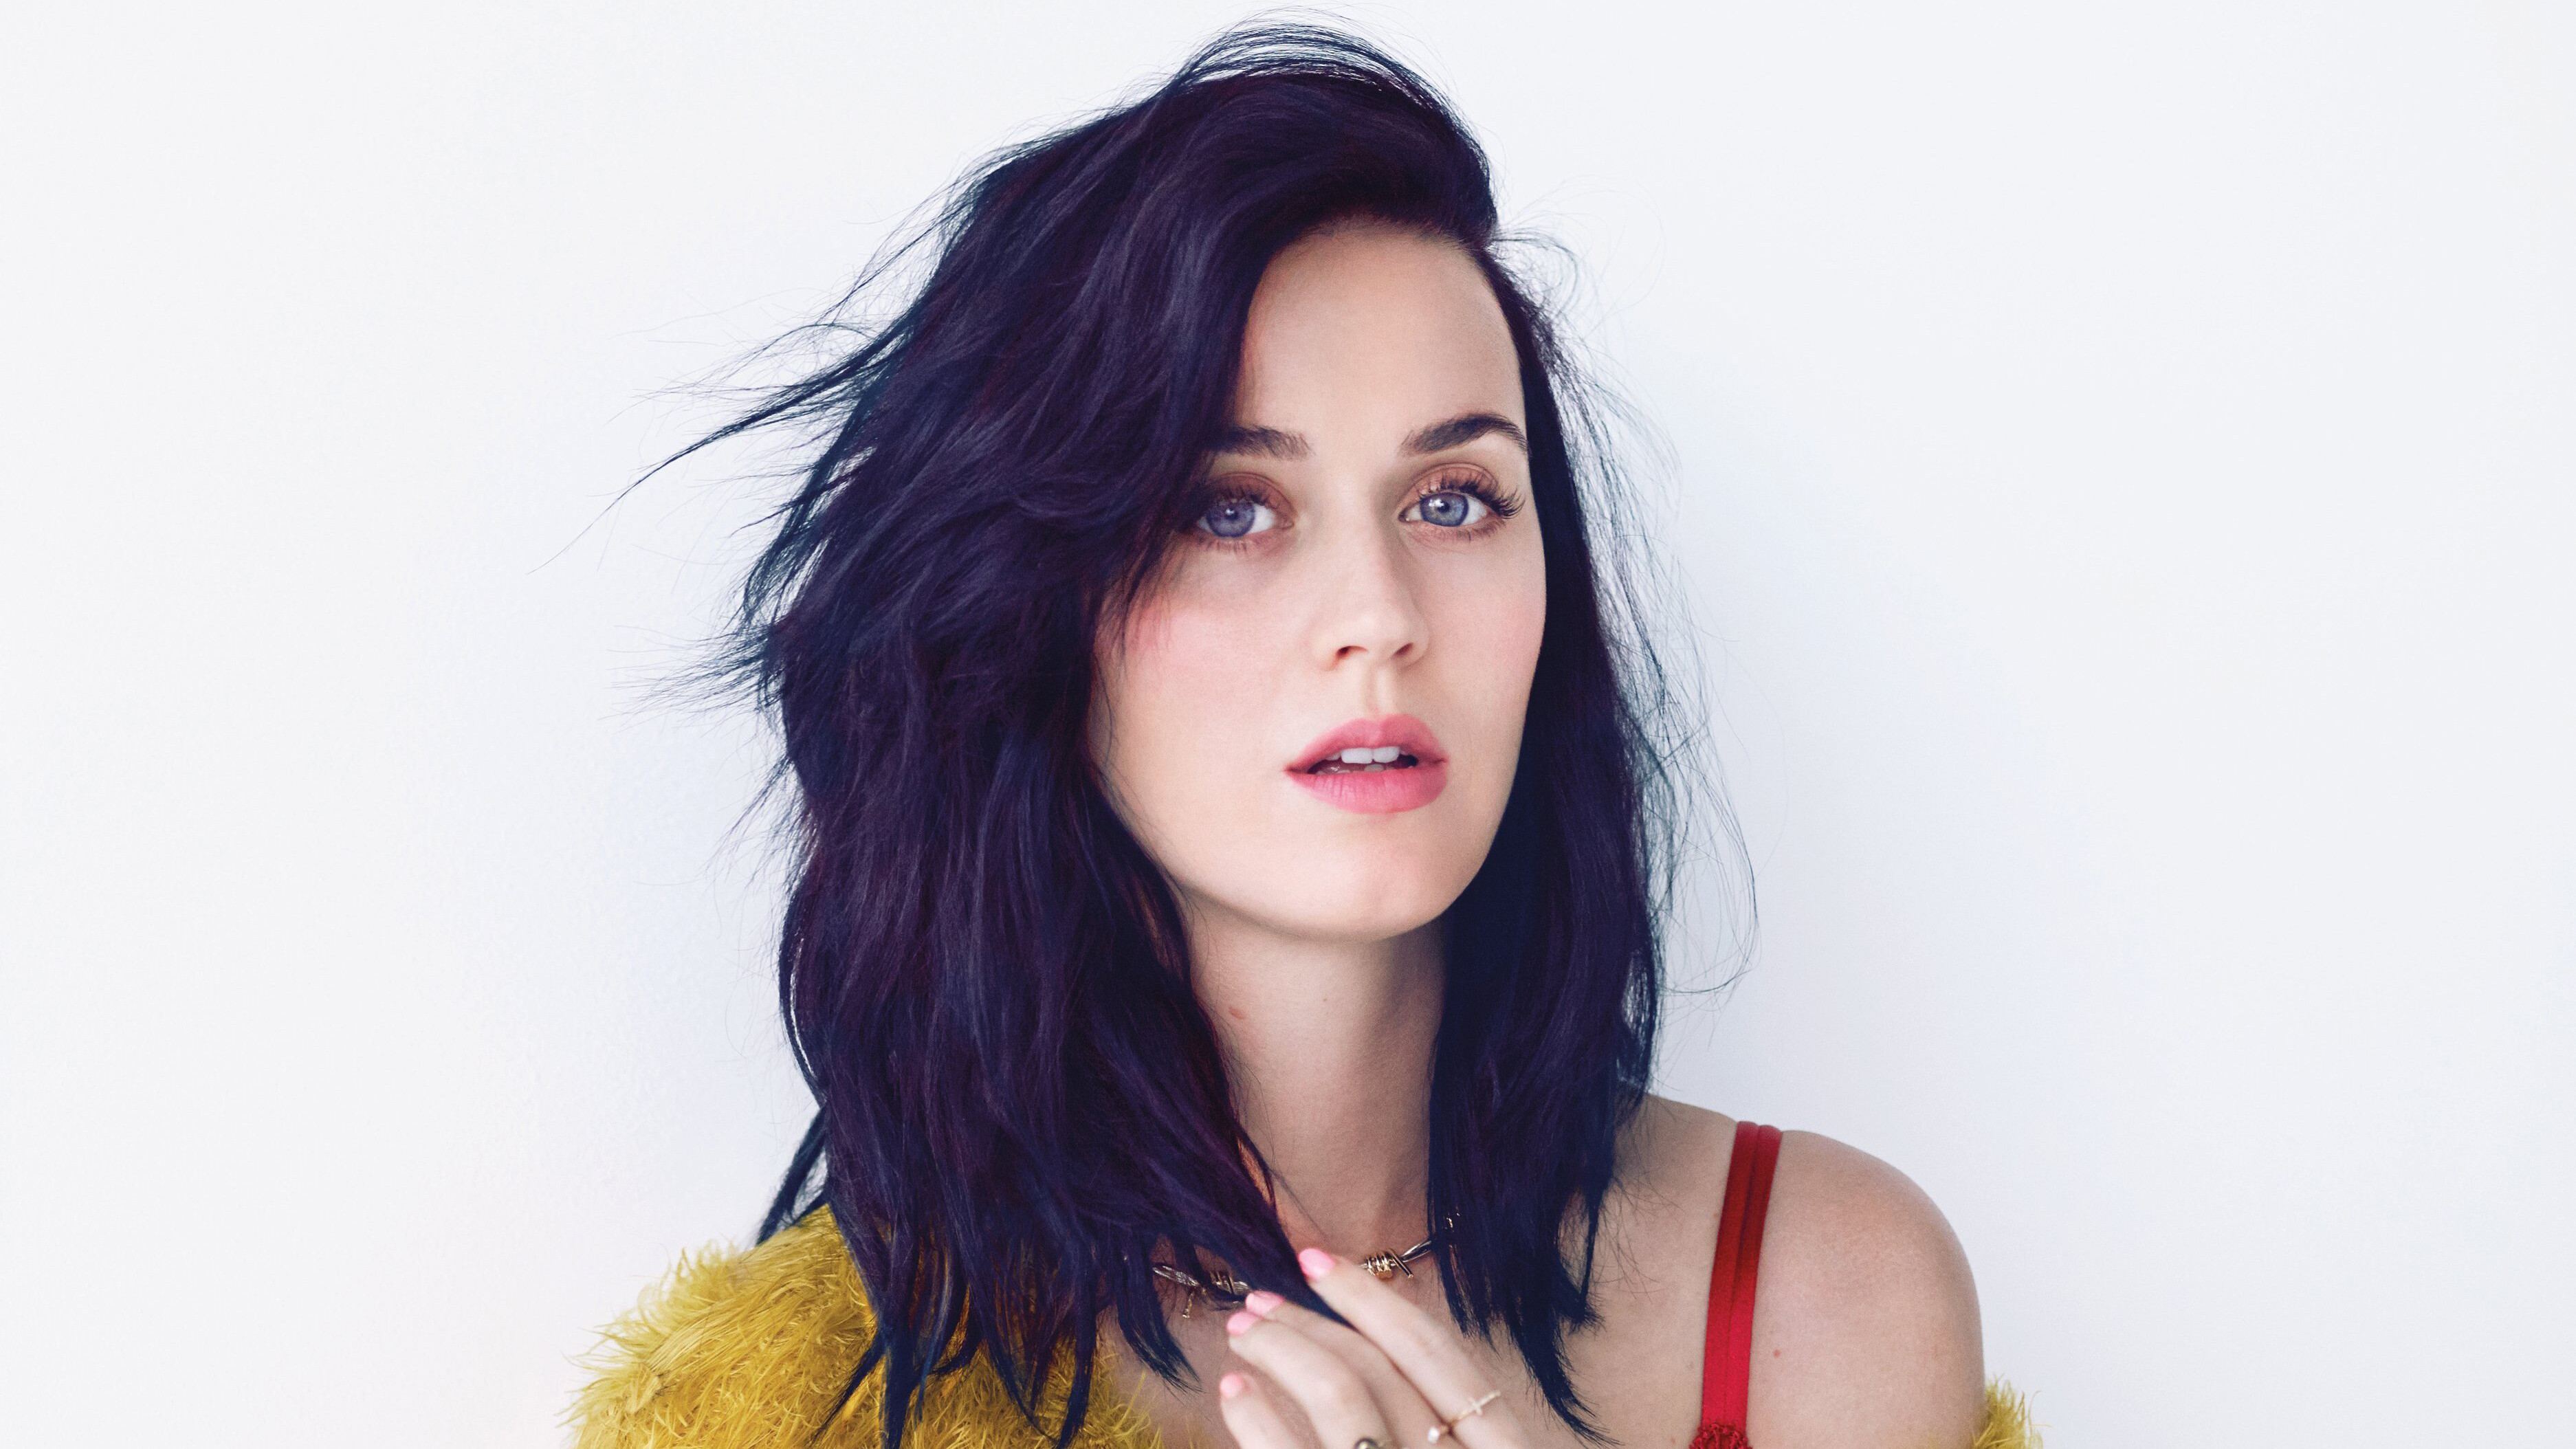 Katy Perry: "I Kissed a Girl" became the singer's first Billboard Hot 100 number-one single. 3750x2110 HD Wallpaper.